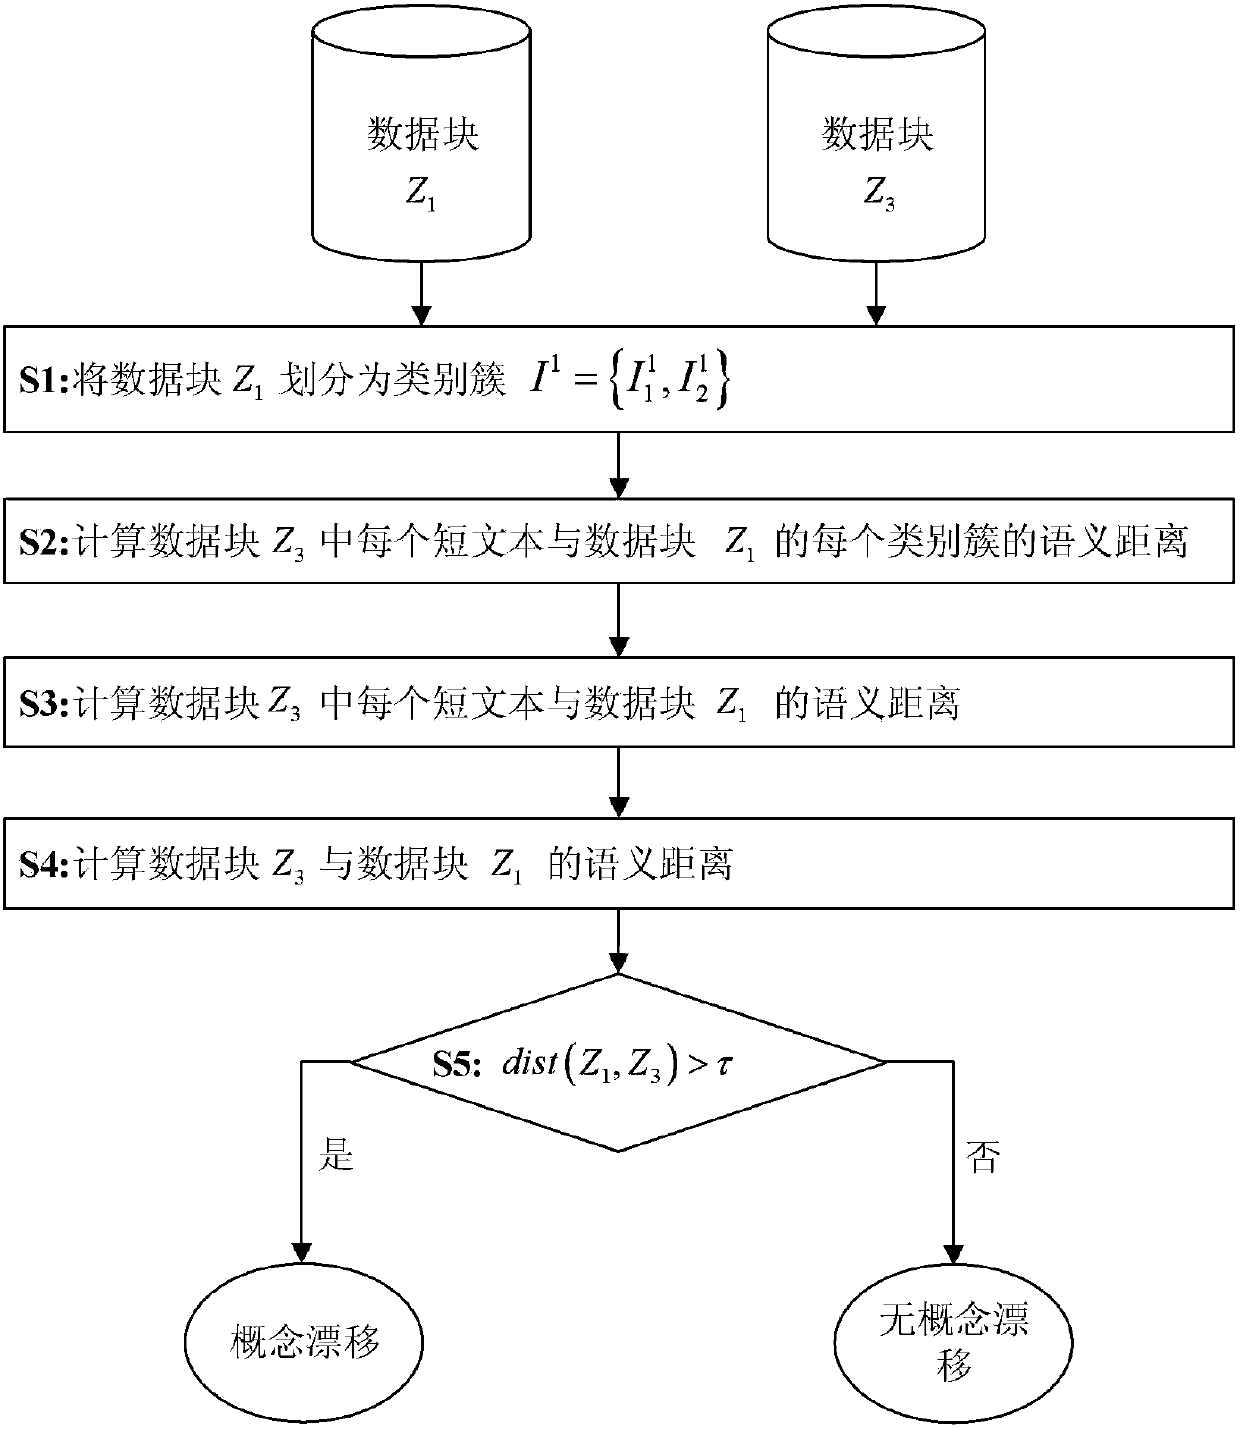 Short-text data stream classification method based on short-text expansion and concept drift detection